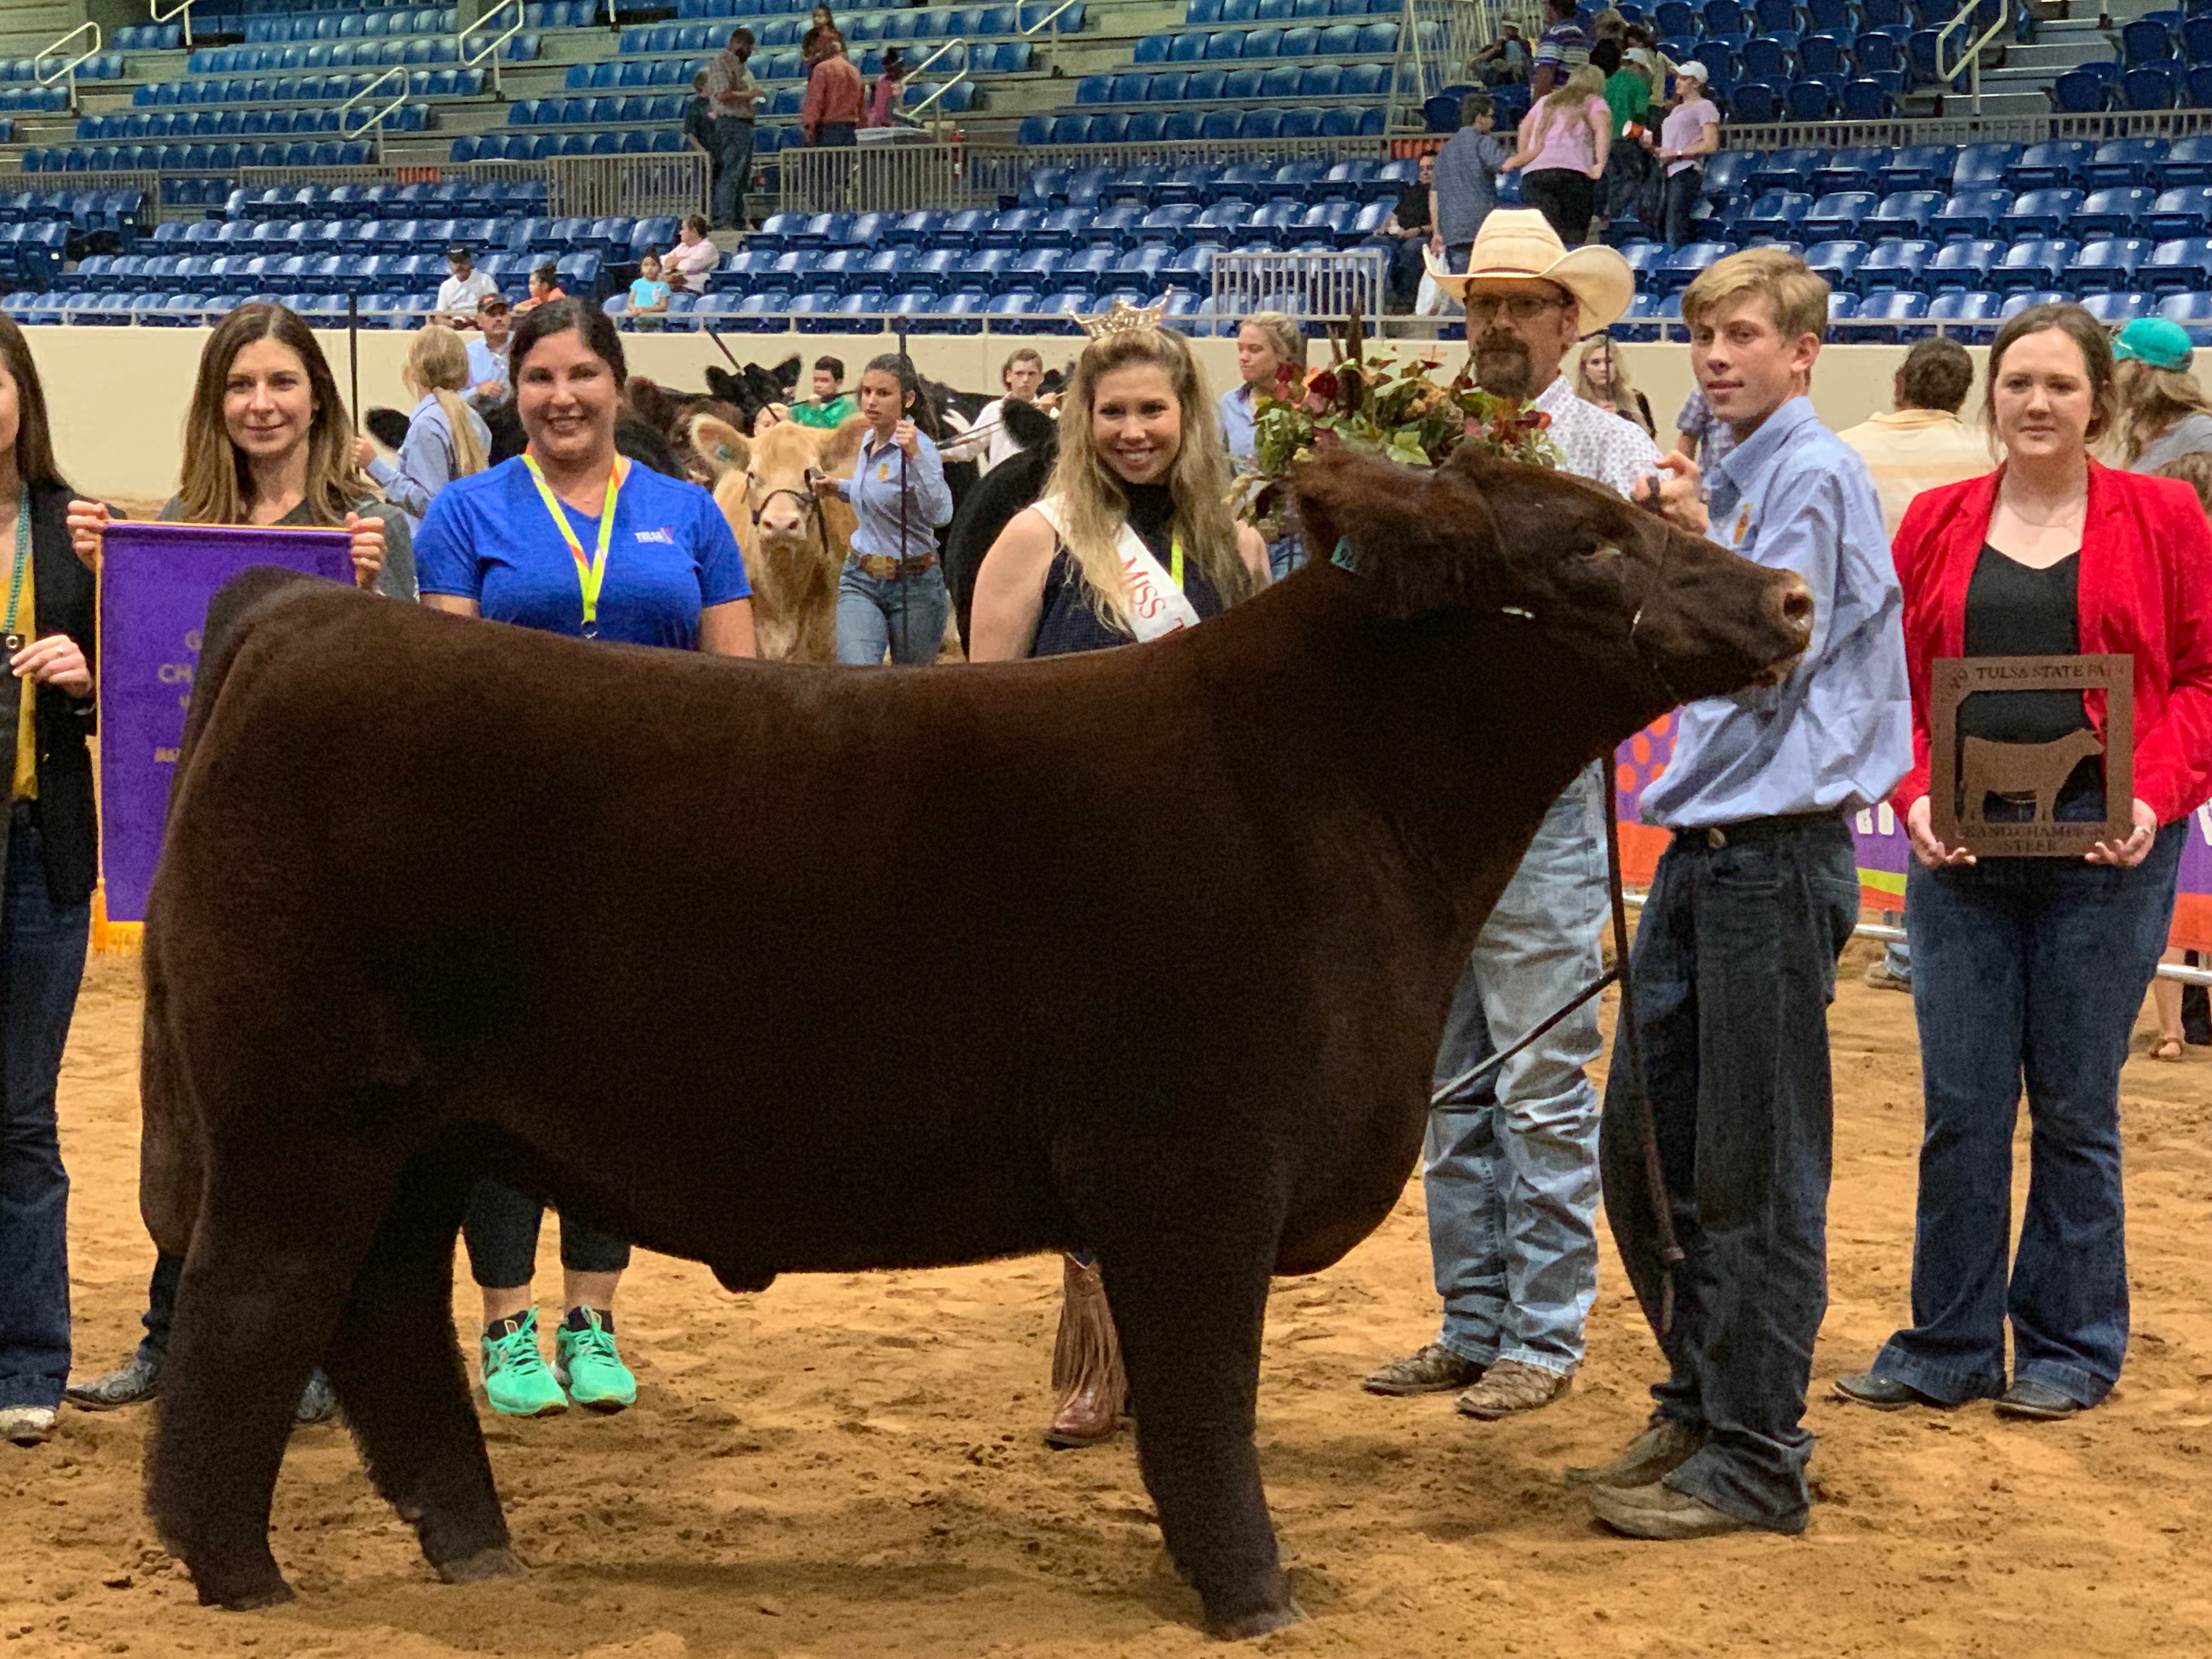 Grand Champion Steer Shown by Kaid Reininger of Newcastle FFA to Lead Off Premium Sale of Market Animals at Tulsa State Fair